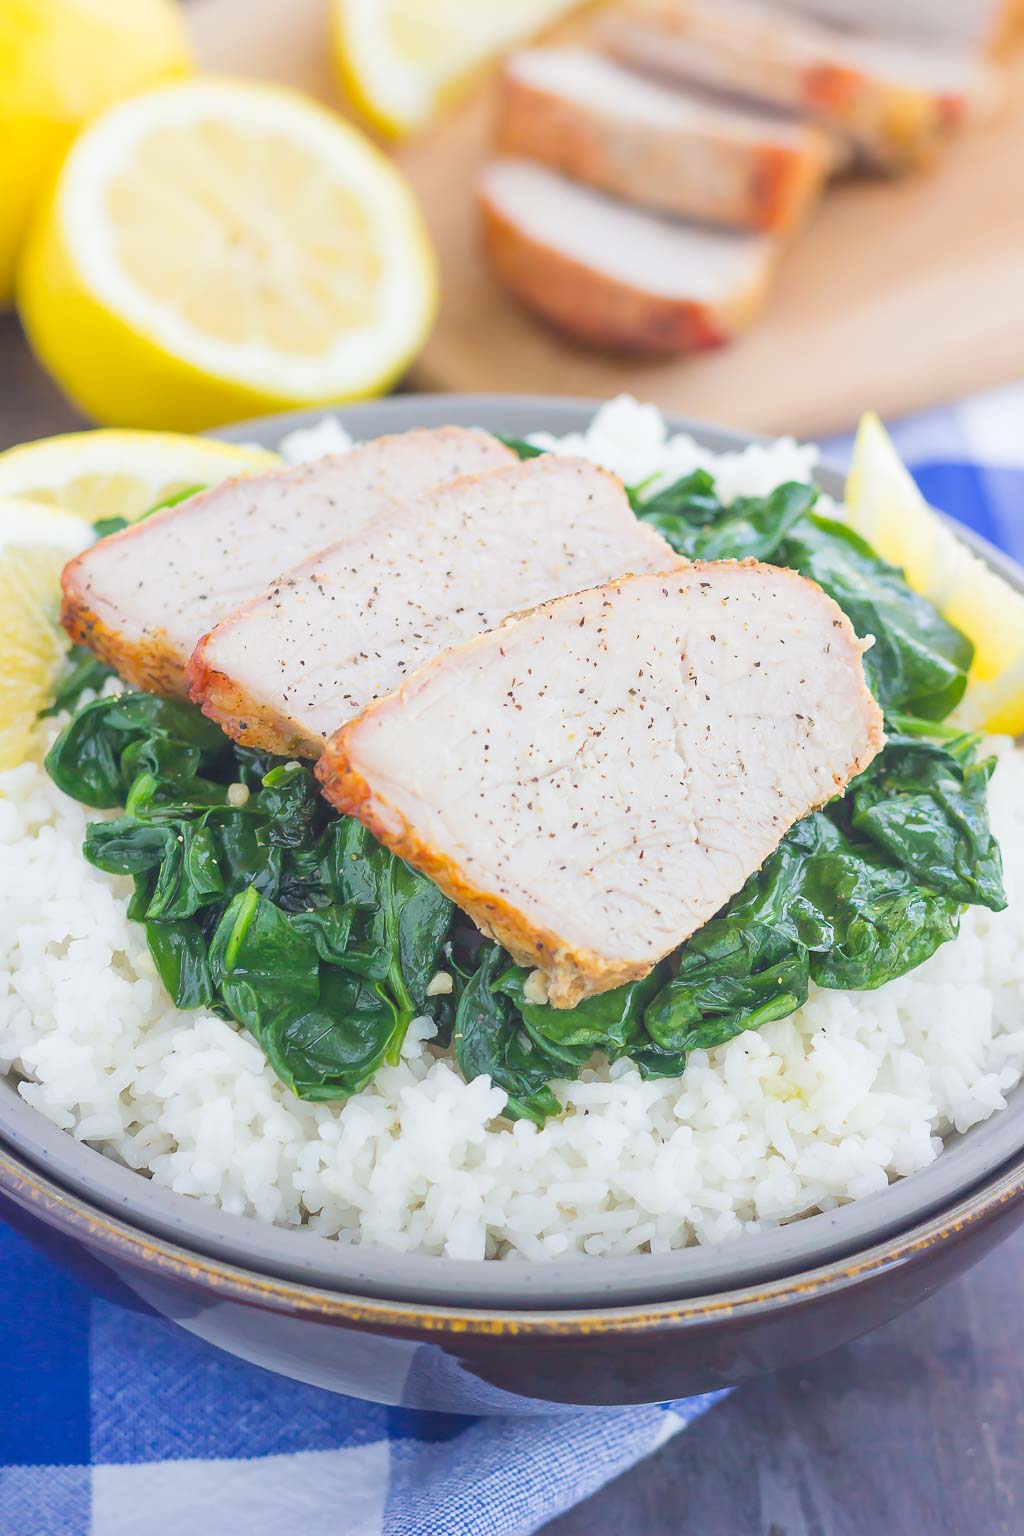 This Grilled Garlic Herb Pork Bowl is an easy meal that's loaded with flavor. Marinated pork loin filet is prepared on the grill and then tossed with some white rice and sautéed spinach. Simple to make a perfect for busy weeknights, this hearty dinner is sure to be a favorite all year long!